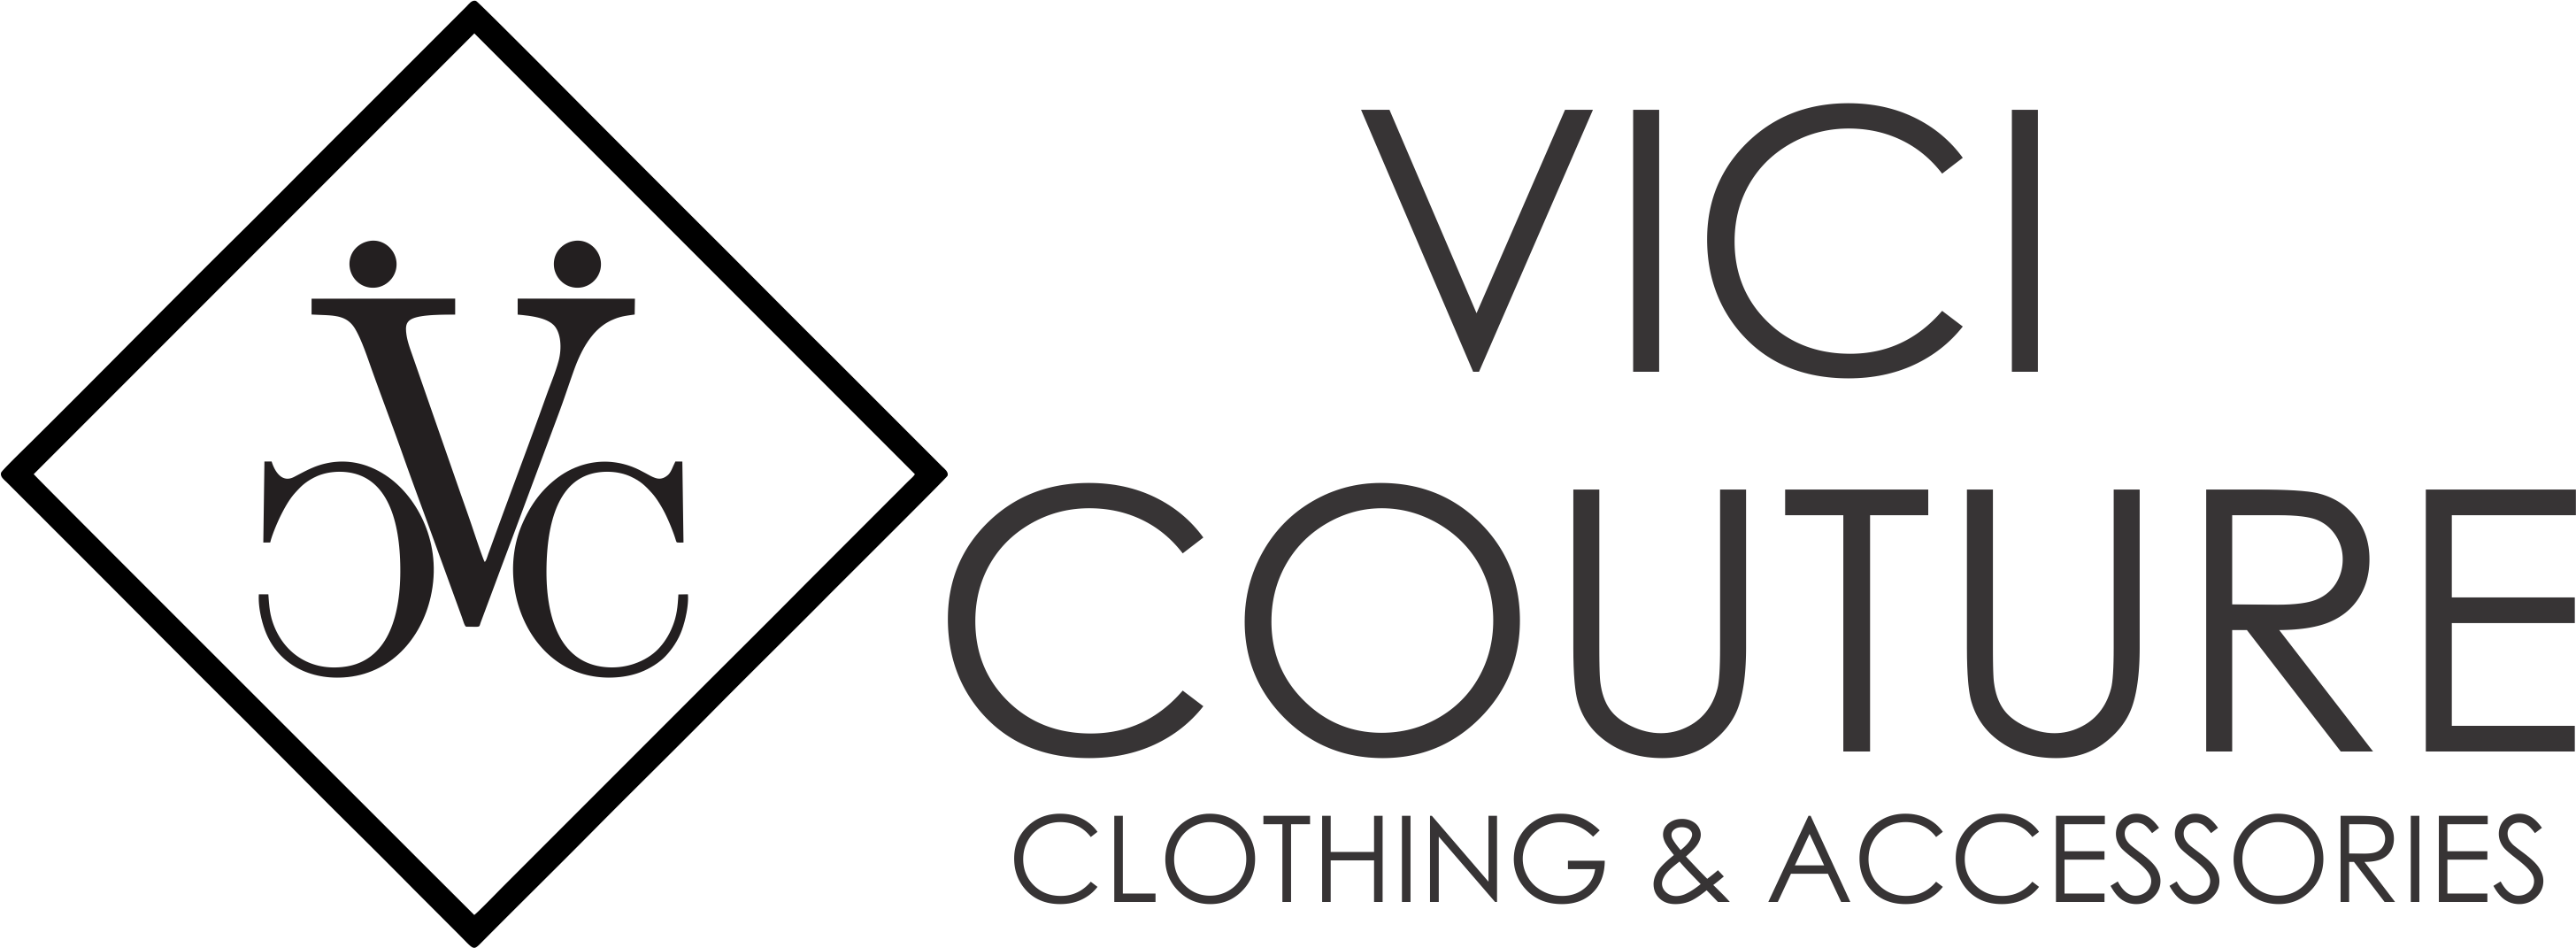 Vici Couture Clothing